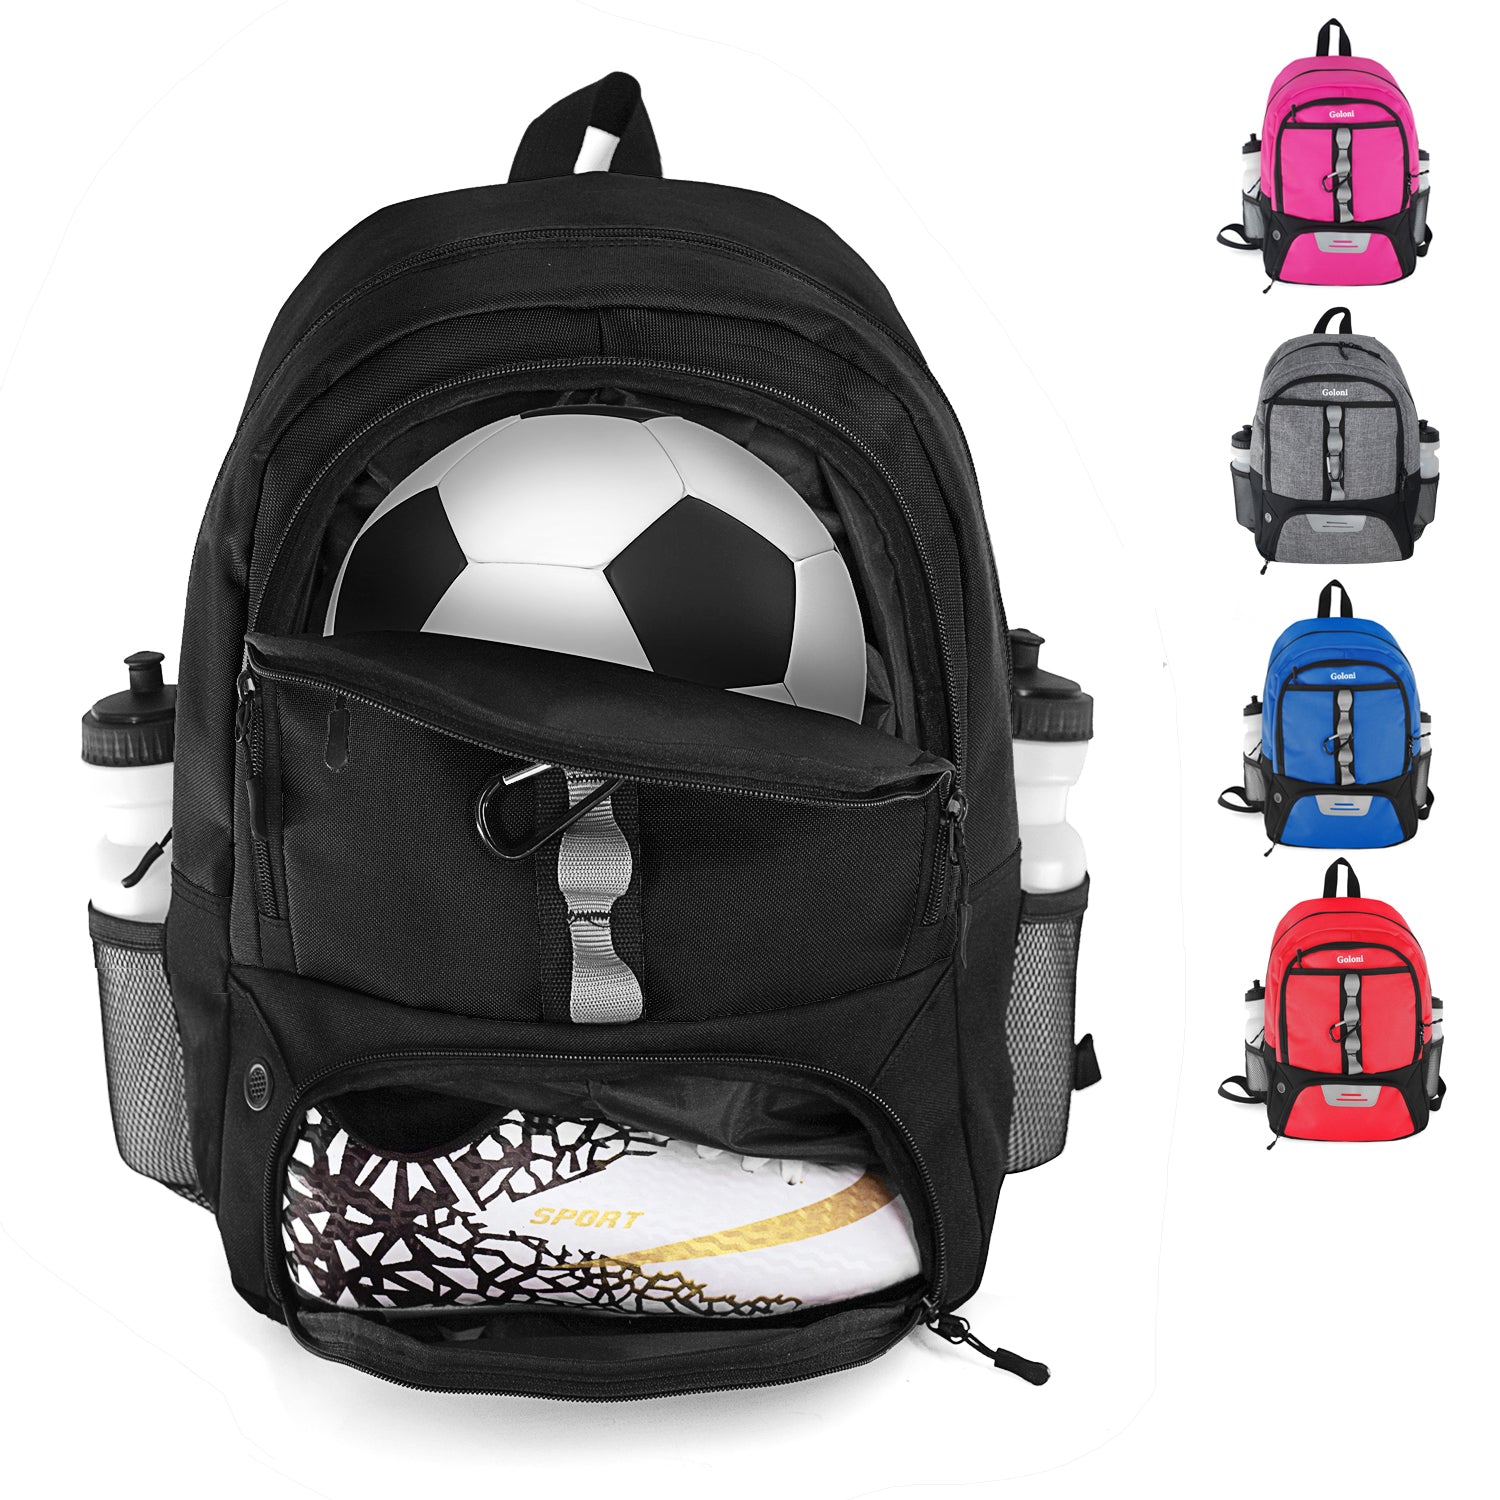  LARIPOP Boys Soccer Bag - Soccer Backpack, Colorful Waterproof  Sports Bag Suitable for Volleyball, Basketball Accessories, Large Capacity  Equipment Bag Gifts, with Ball Compartment and Laptop Compart : Sports &  Outdoors